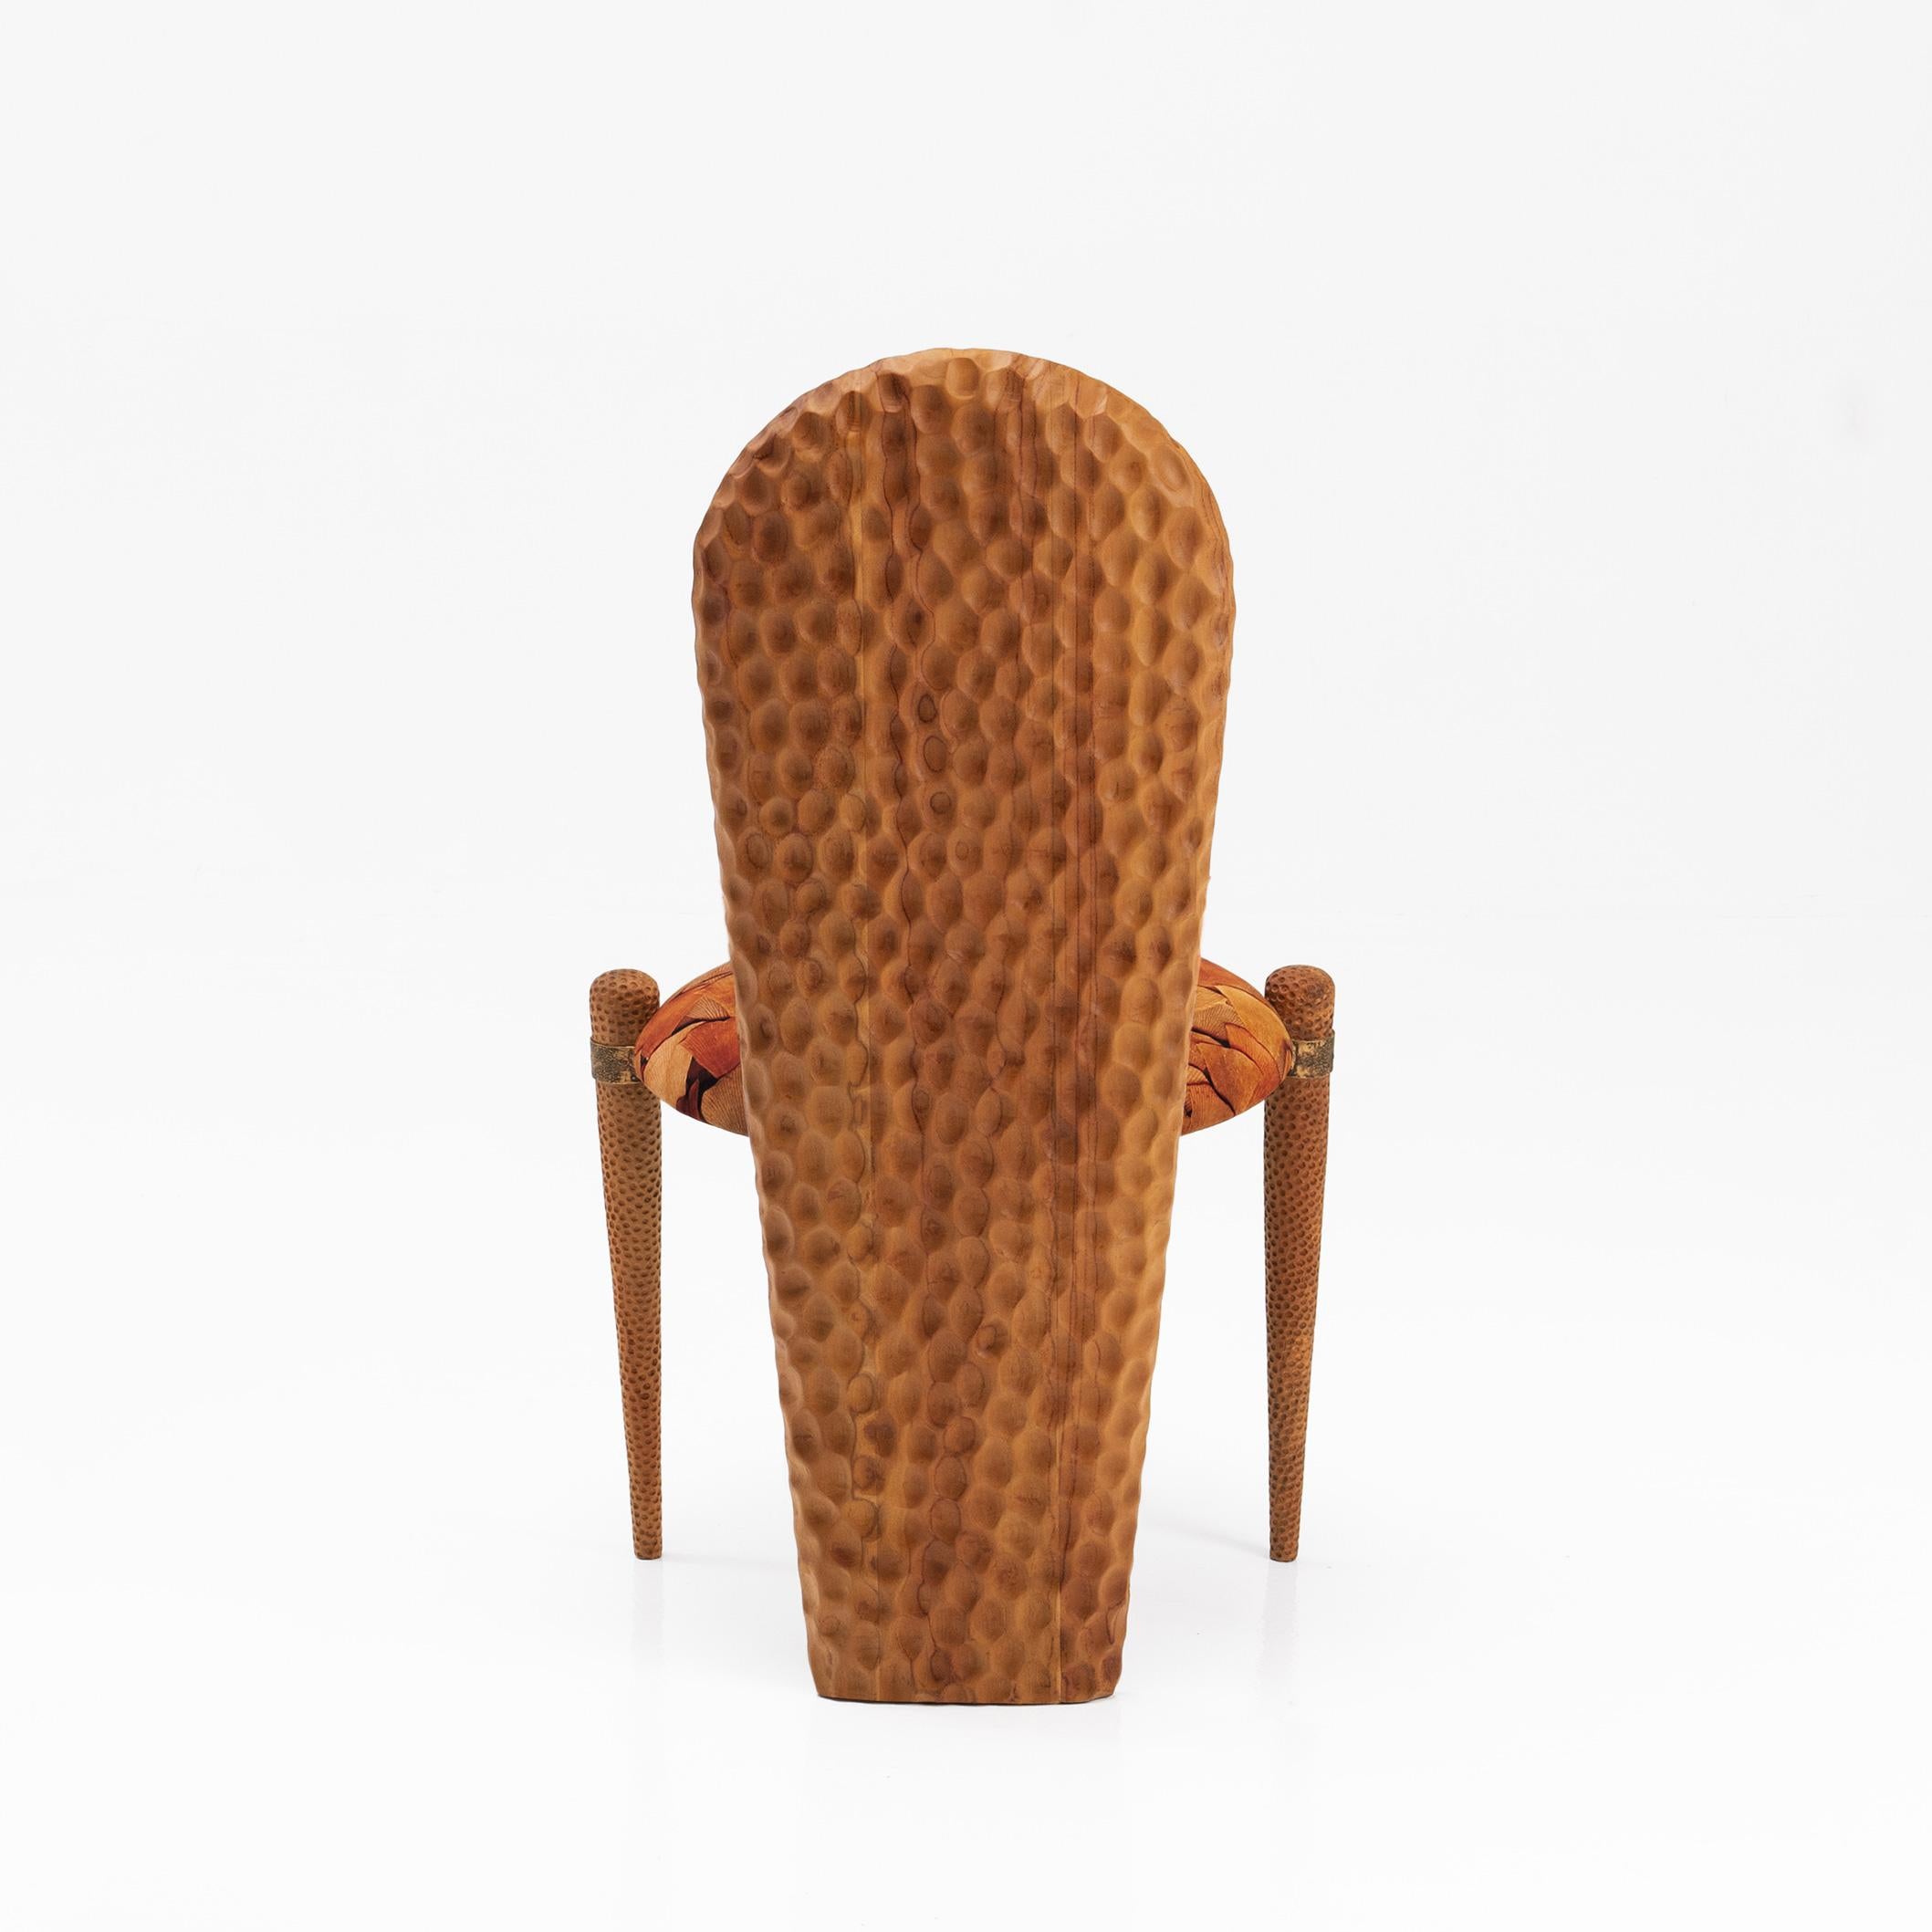 An ode to future nostalgia, the 'Naughty by Nature' chair explores notions of tradition and reinvention. In nature, shapes are formed and reformed with ever changing beauty, this piece pays tribute to this constant state of transformation. 

This